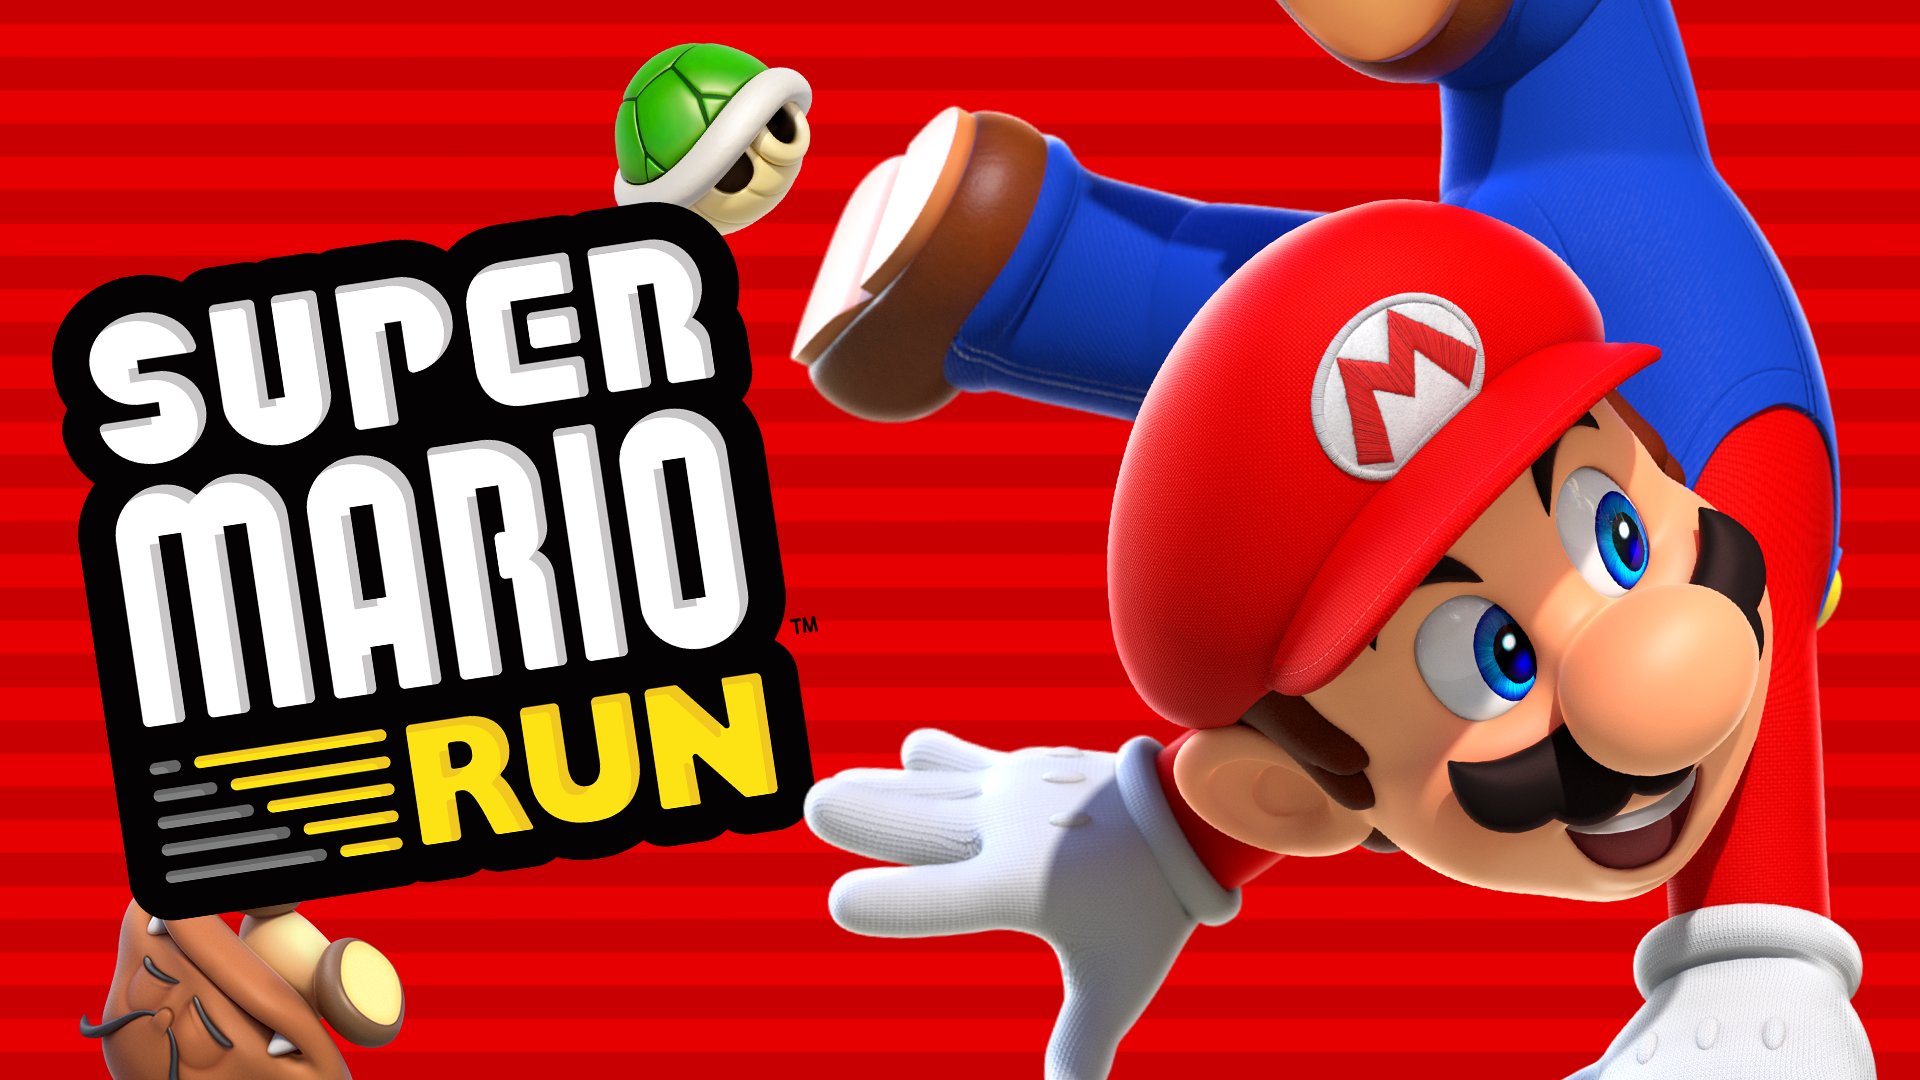 Nintendo of America - #SuperMarioRun has reached 40 million downloads worldwide in just 4 days! Thanks for playing, everyone!